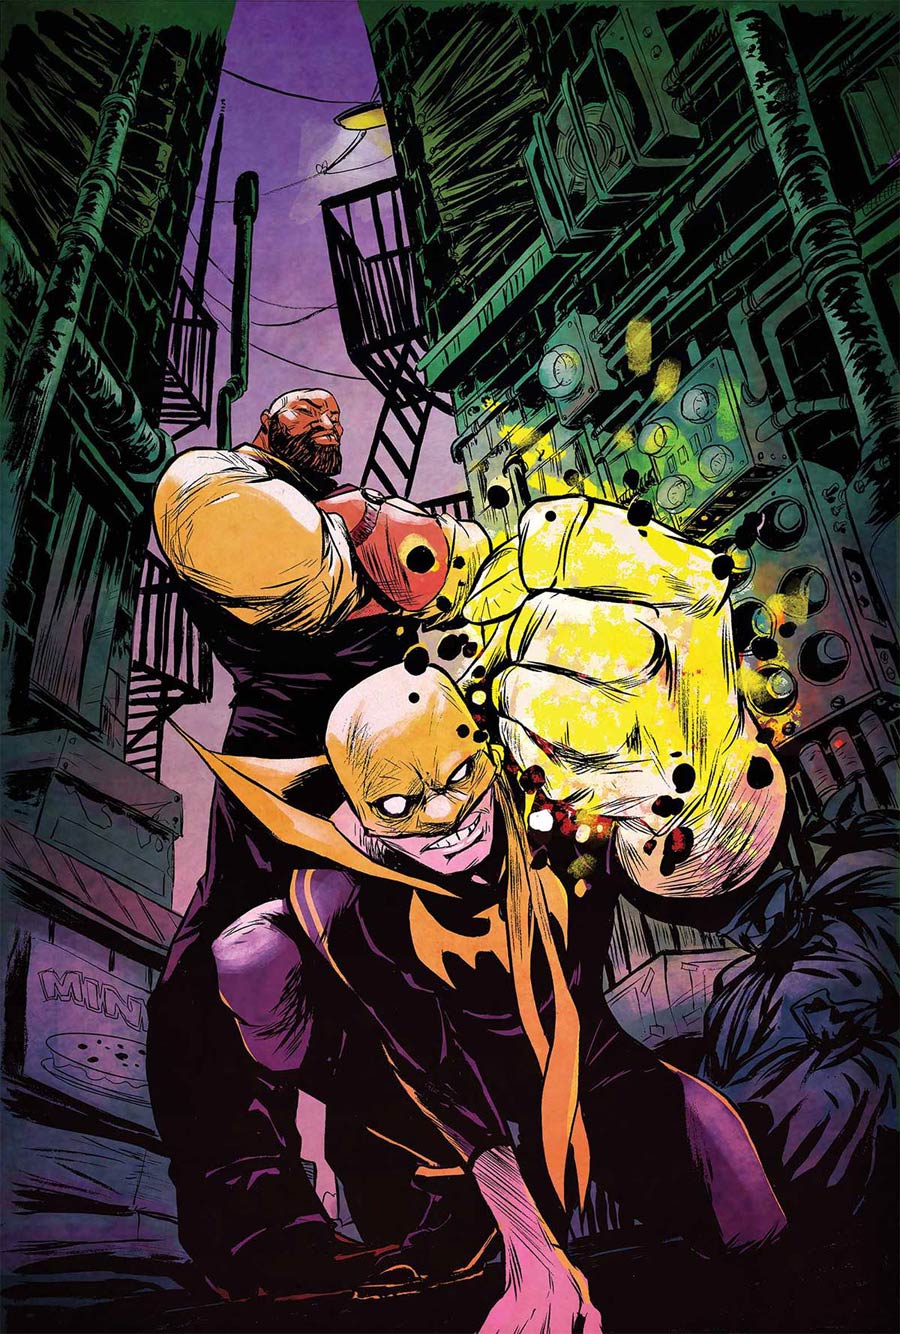 Power Man And Iron Fist Vol 3 #1 By Sanford Greene Poster